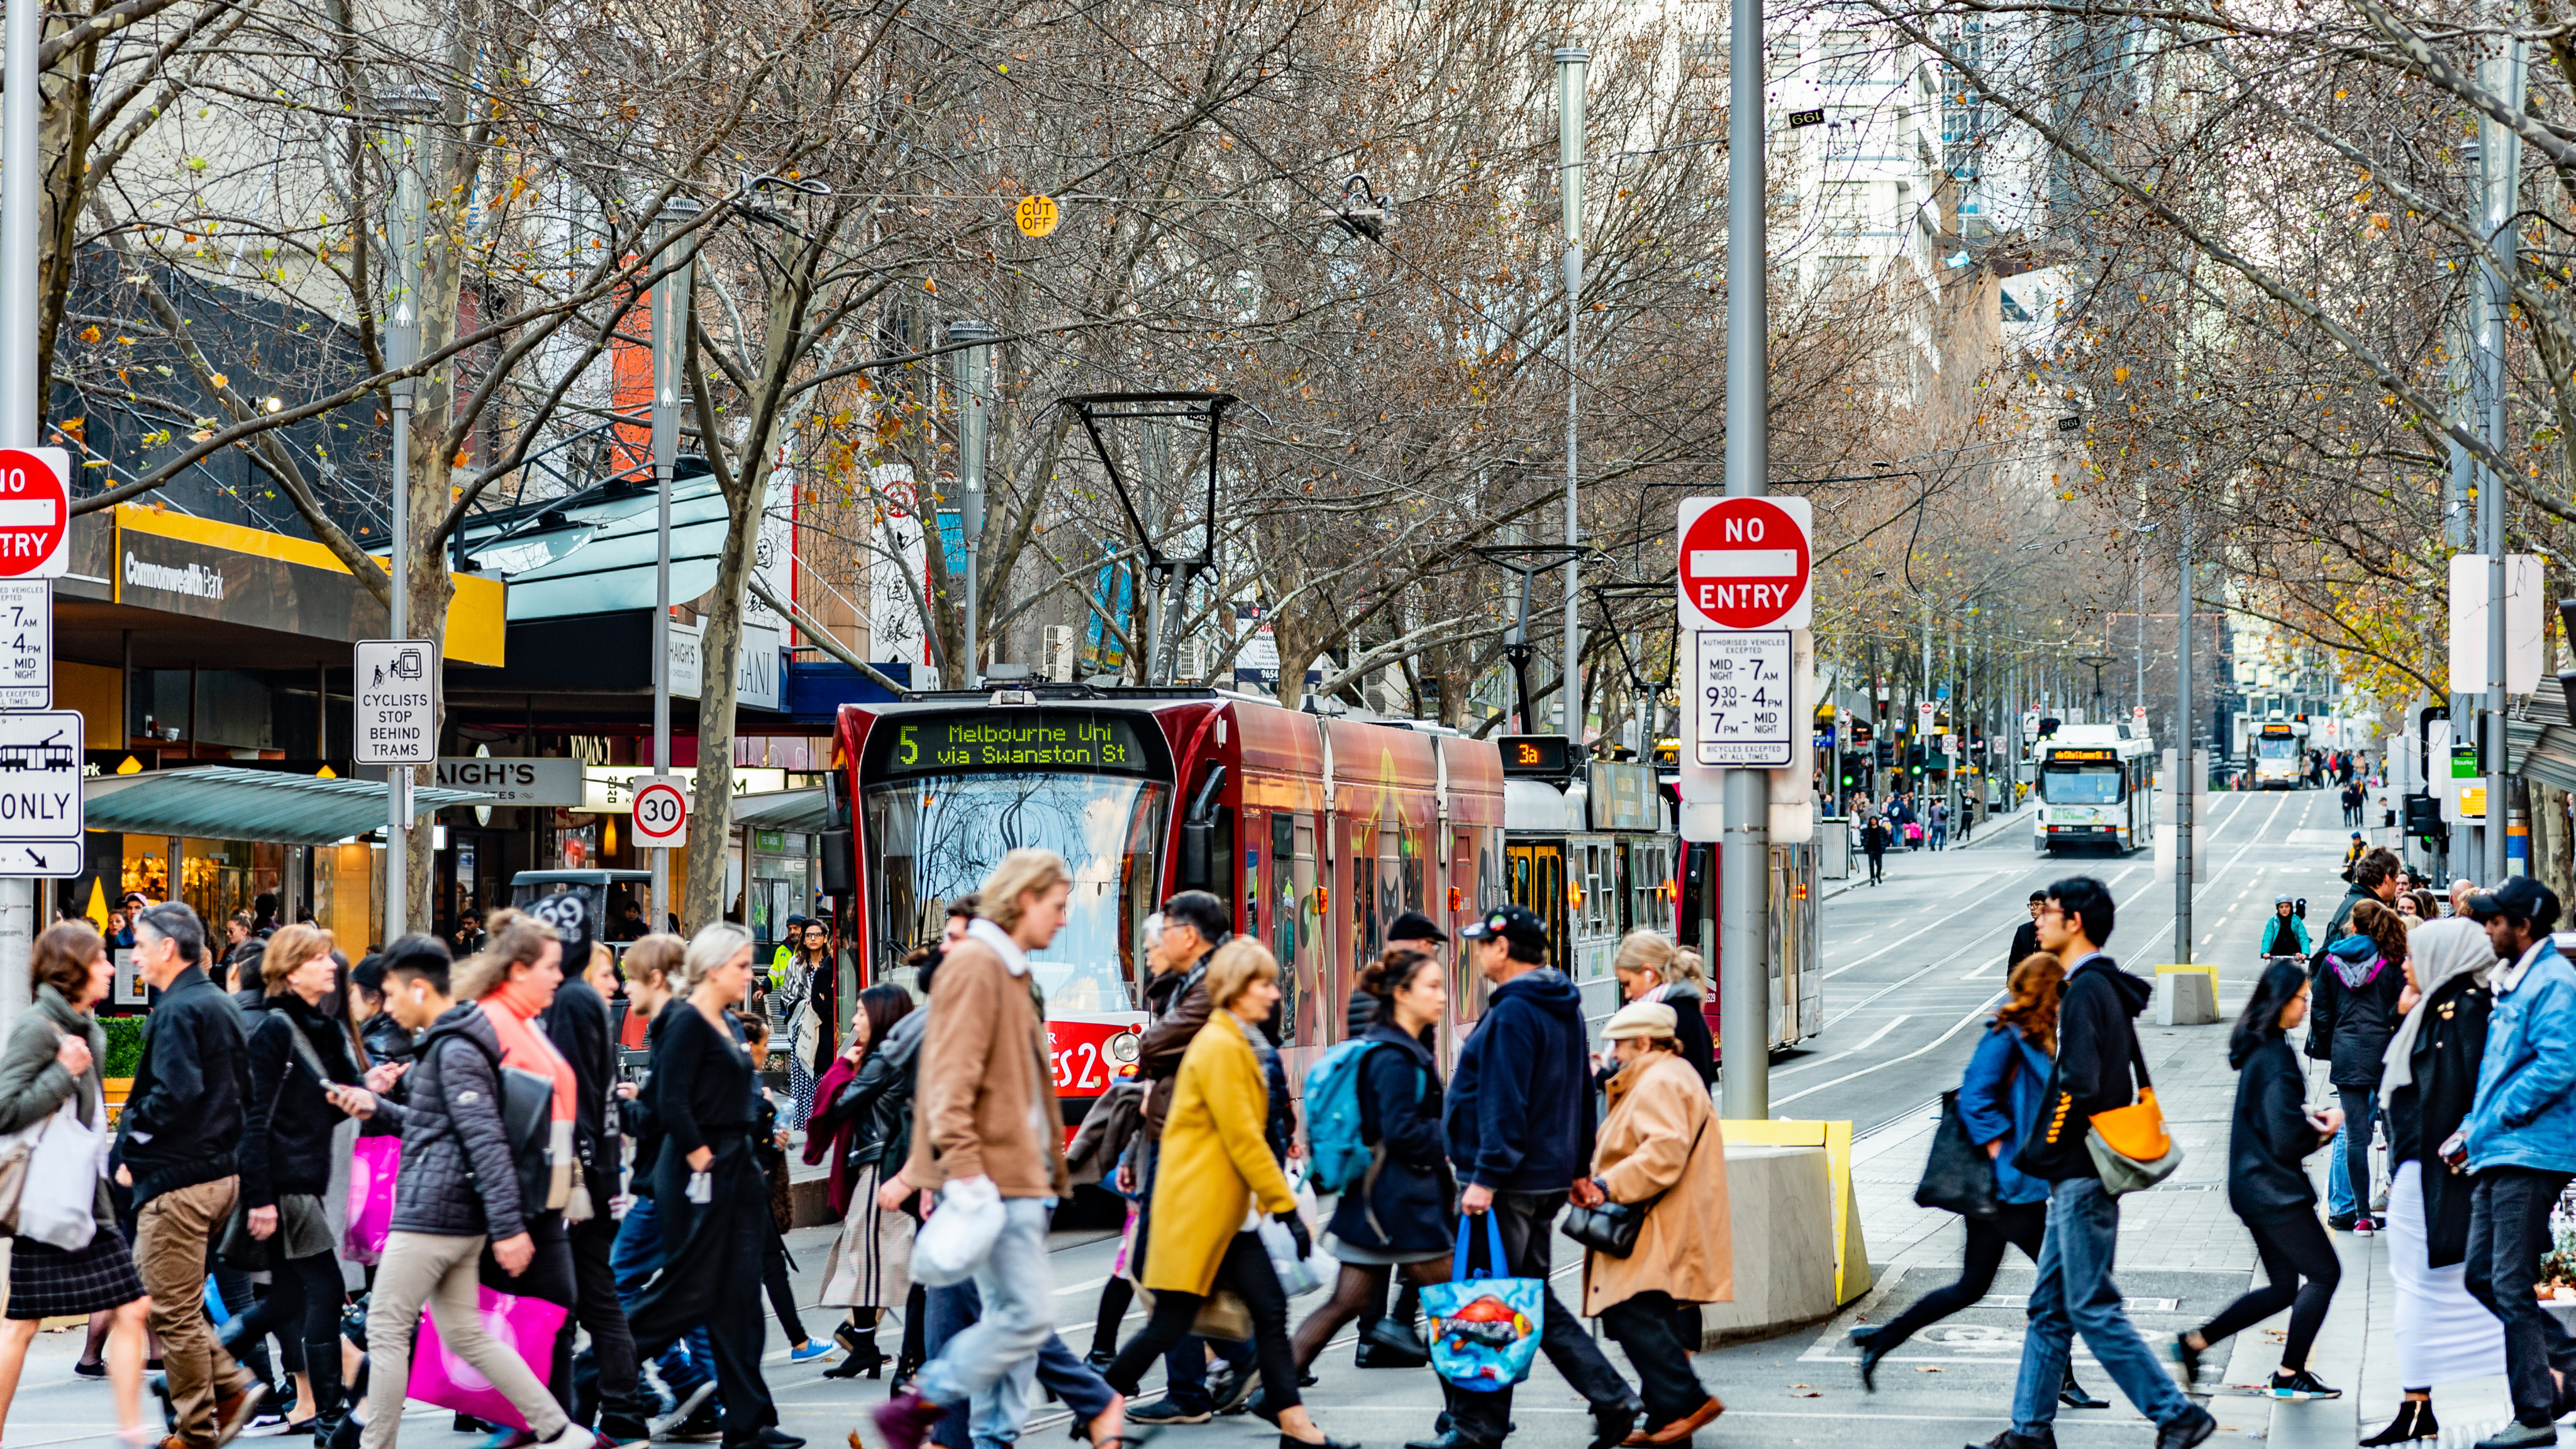 Pedestrians in Melbourne, Australia. An ageing population will place pressures on Australia’s financial resources. Photo: Shutterstock